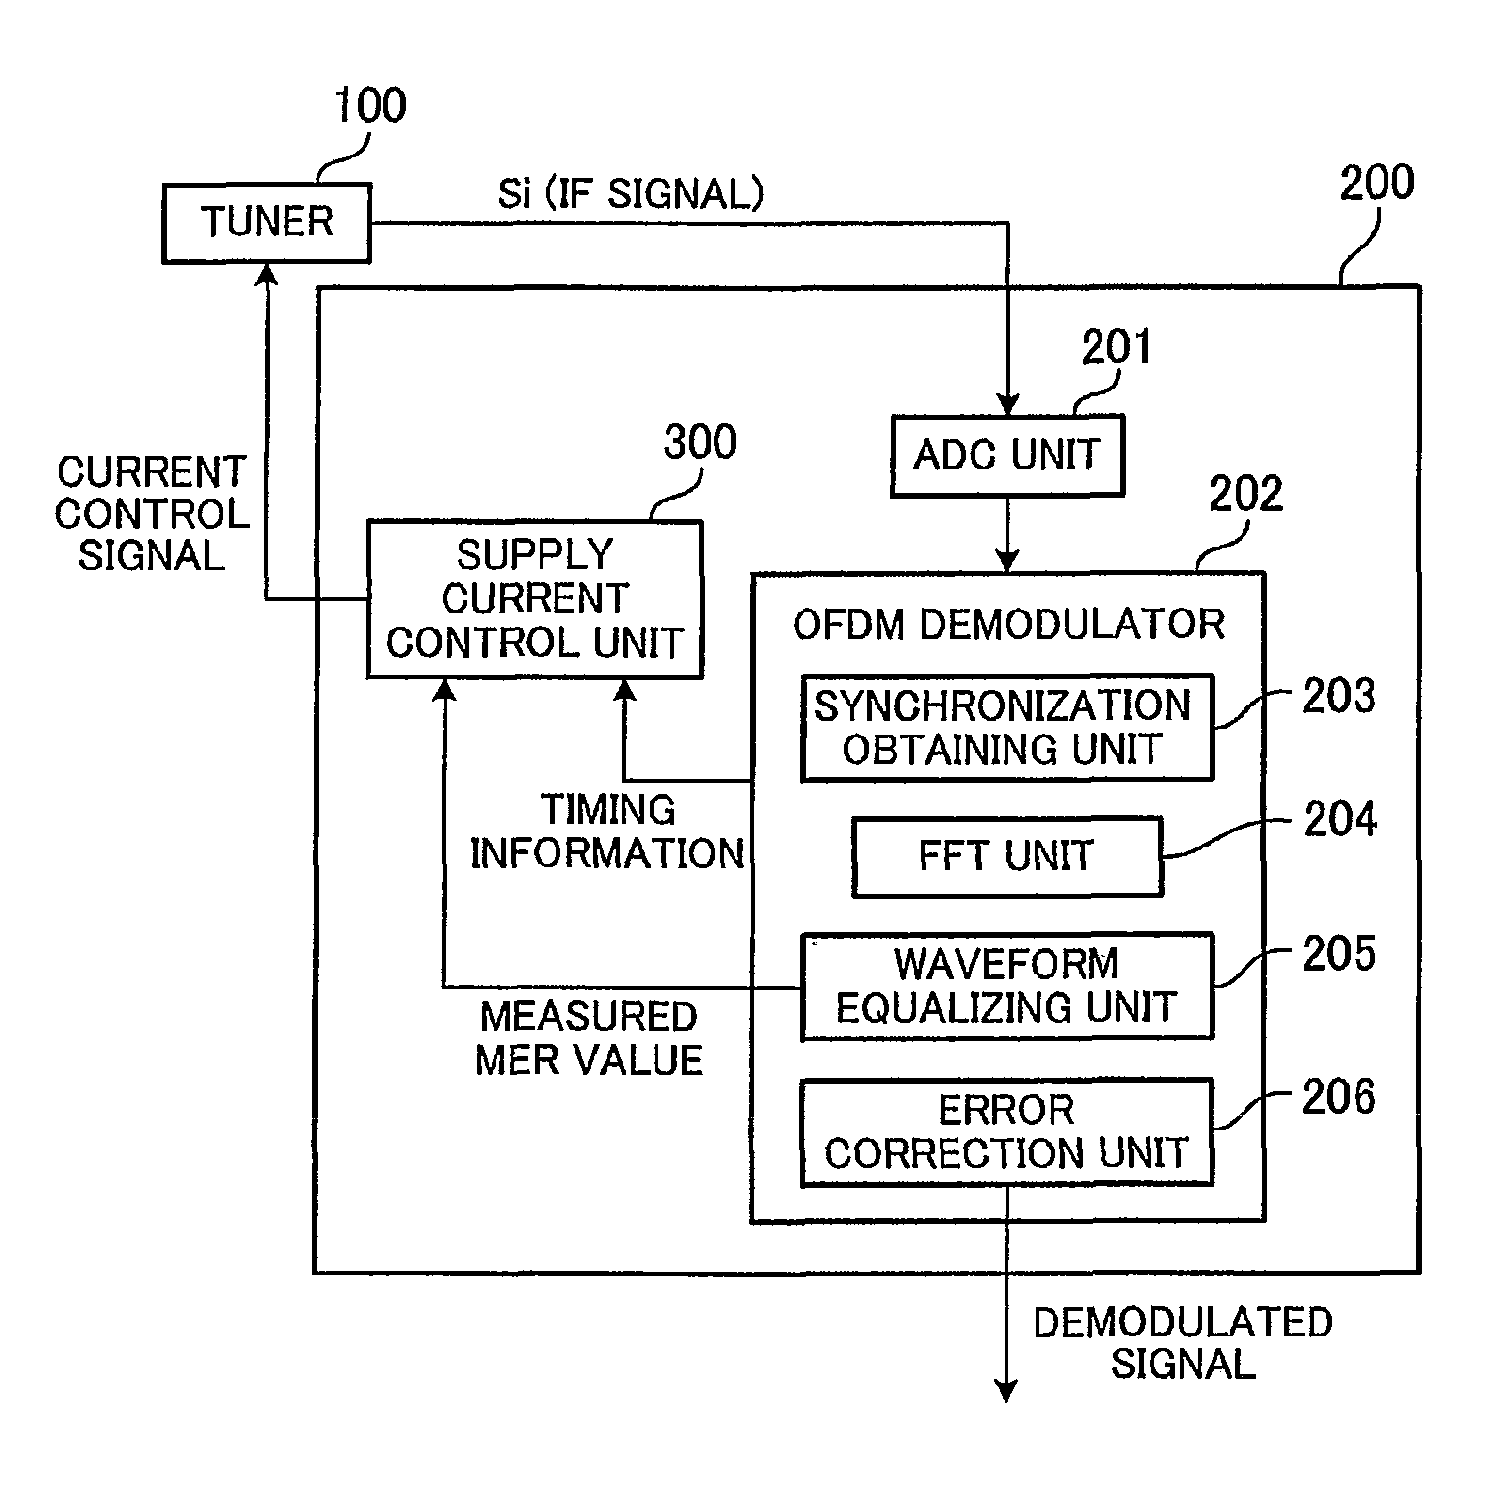 Digital receiver, controlling method of the apparatus, computer program product, and recording medium recording thereon the product